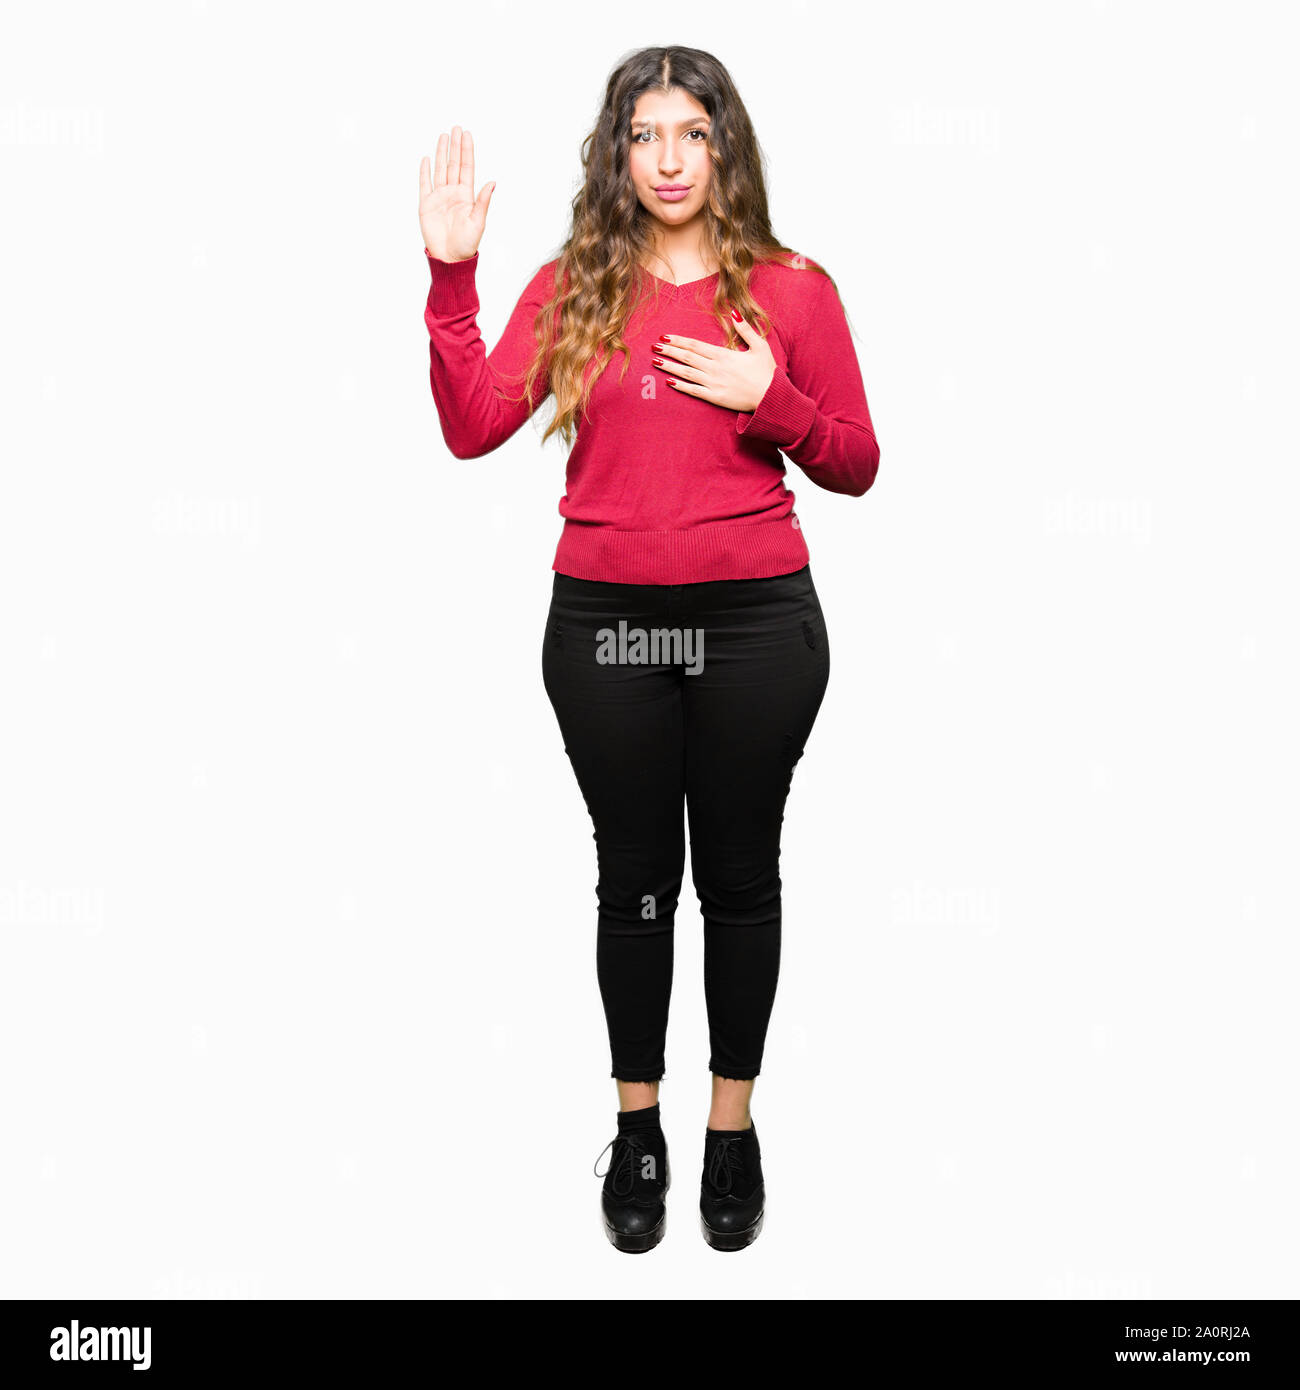 Young beautiful woman wearing red sweater Swearing with hand on chest and open palm, making a loyalty promise oath Stock Photo